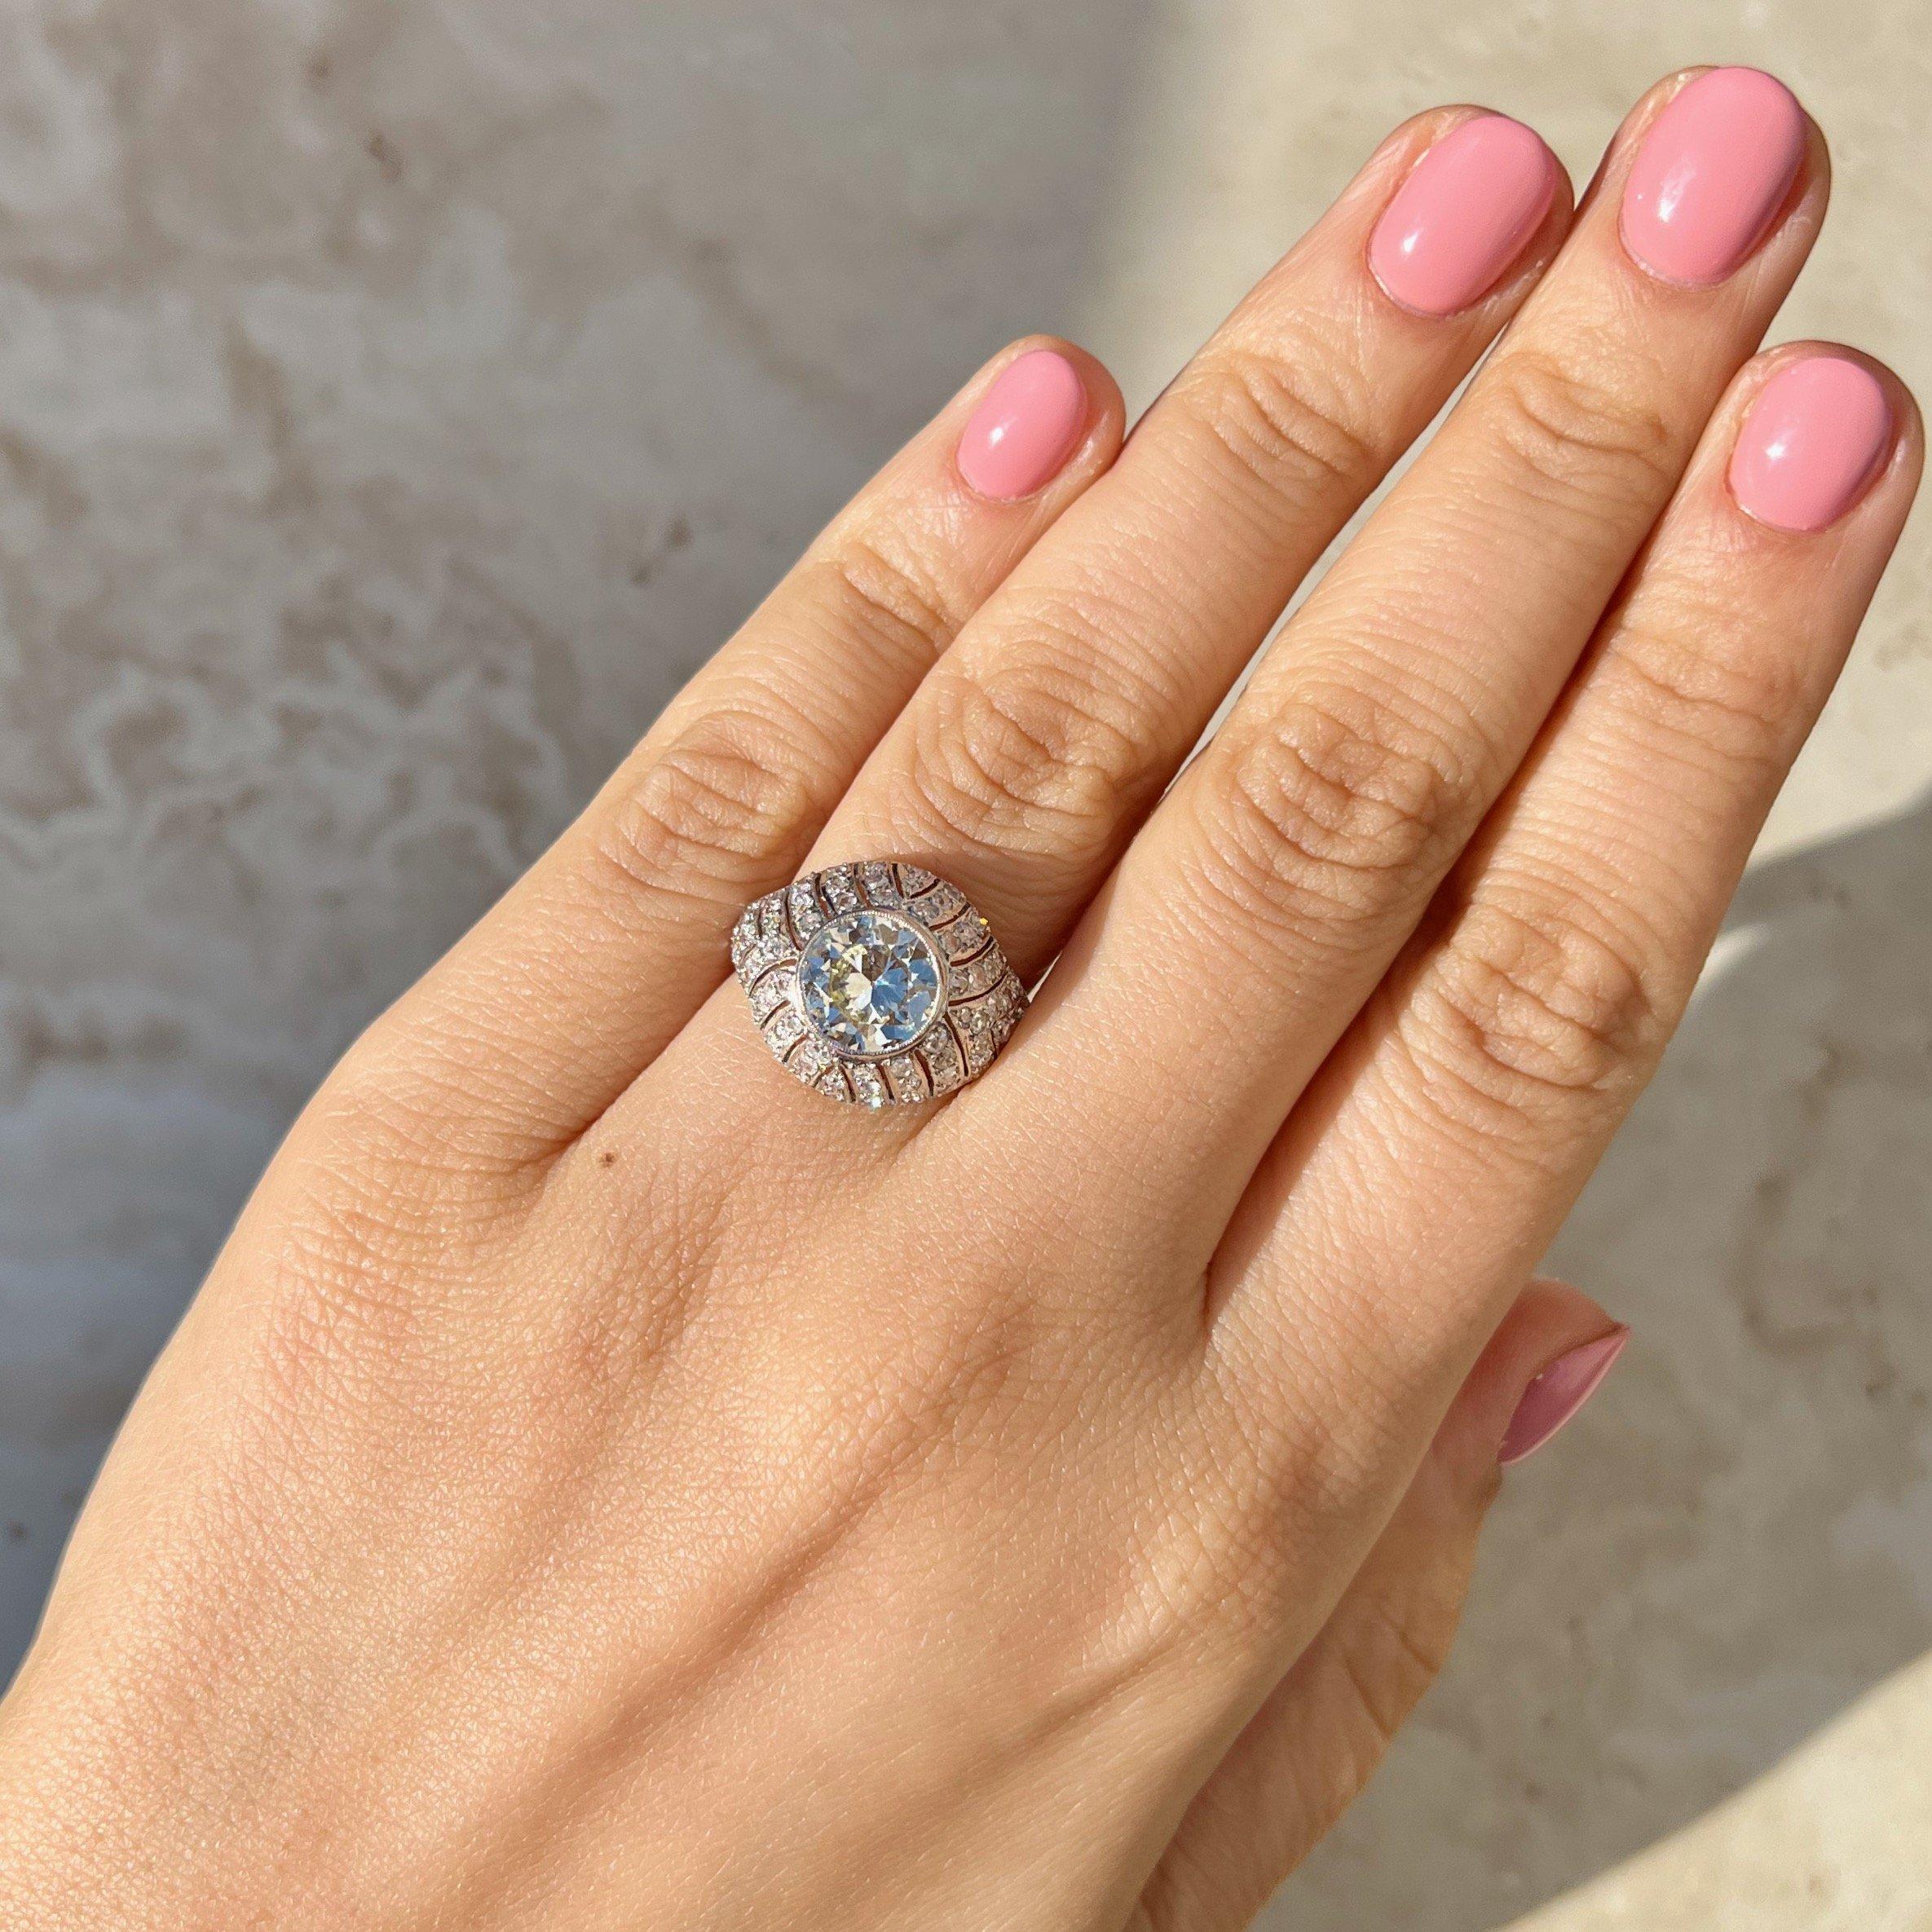 An antique dome ring with a stunningly bright Old European cut center that shines from across the room. There's something so special about a classic old Euro, and this 2.25 carat center diamond give us all that old-world charm. Set in a platinum